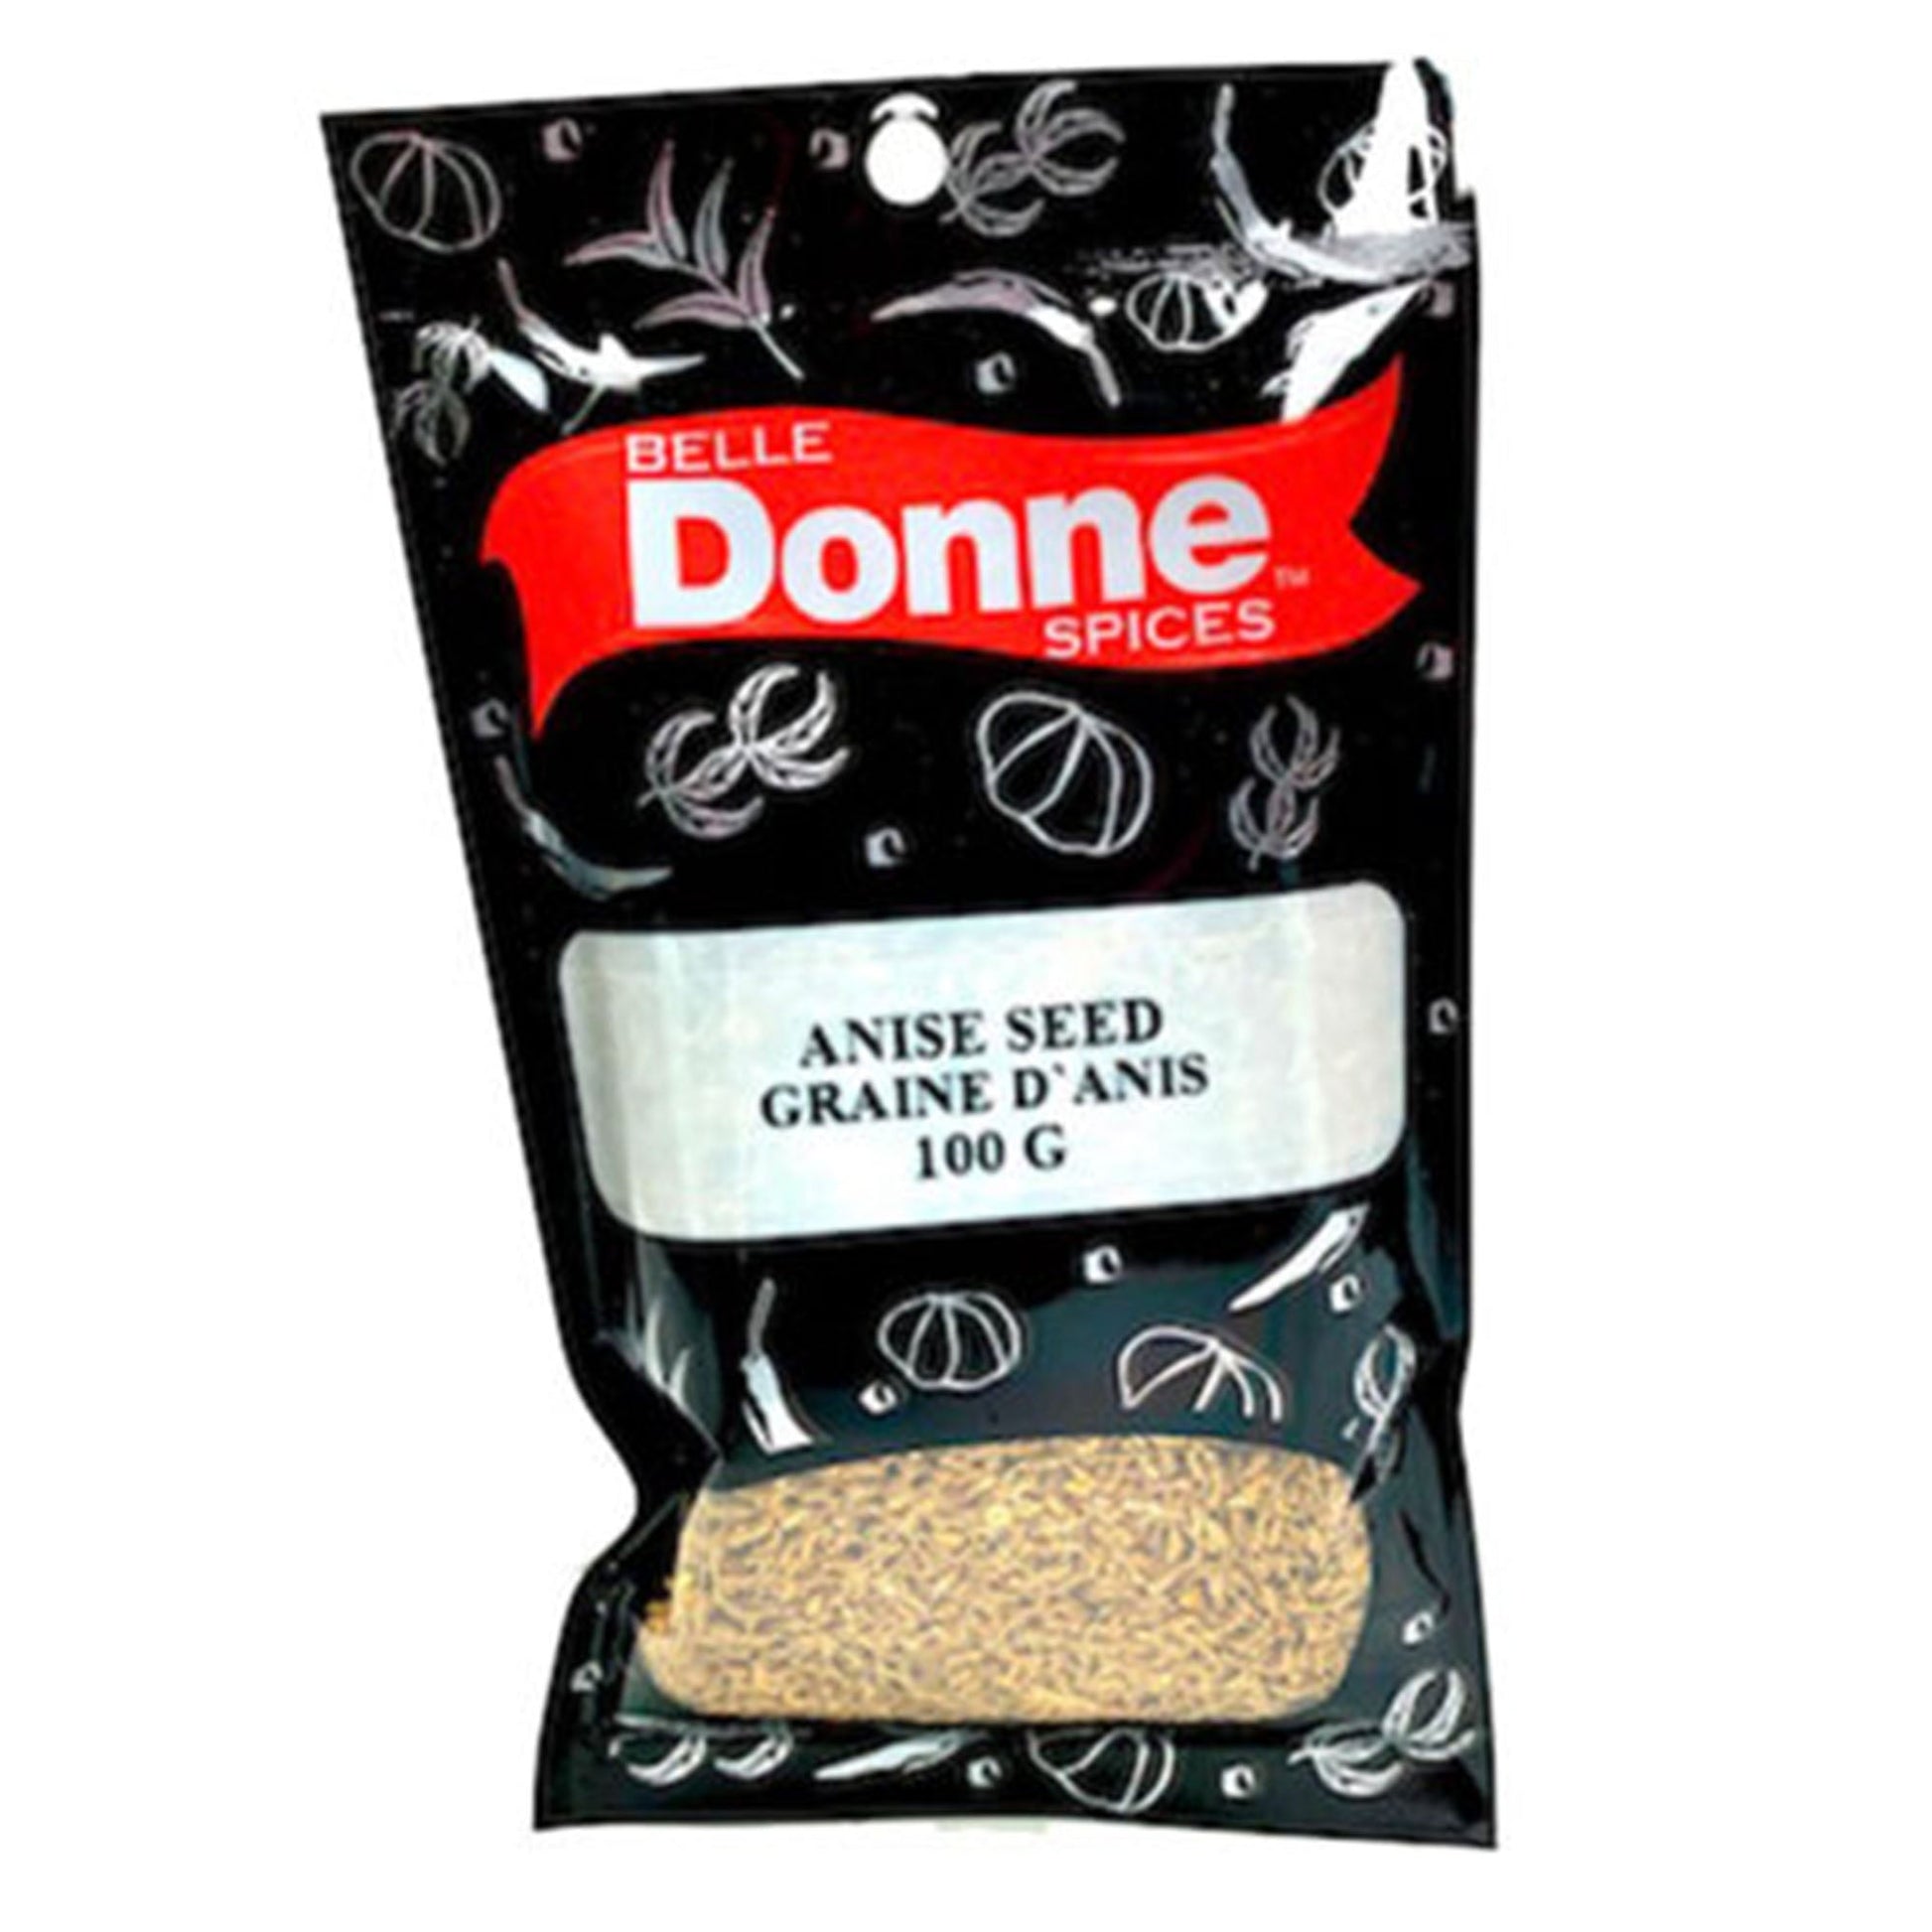 Donne Anise Seed 100G